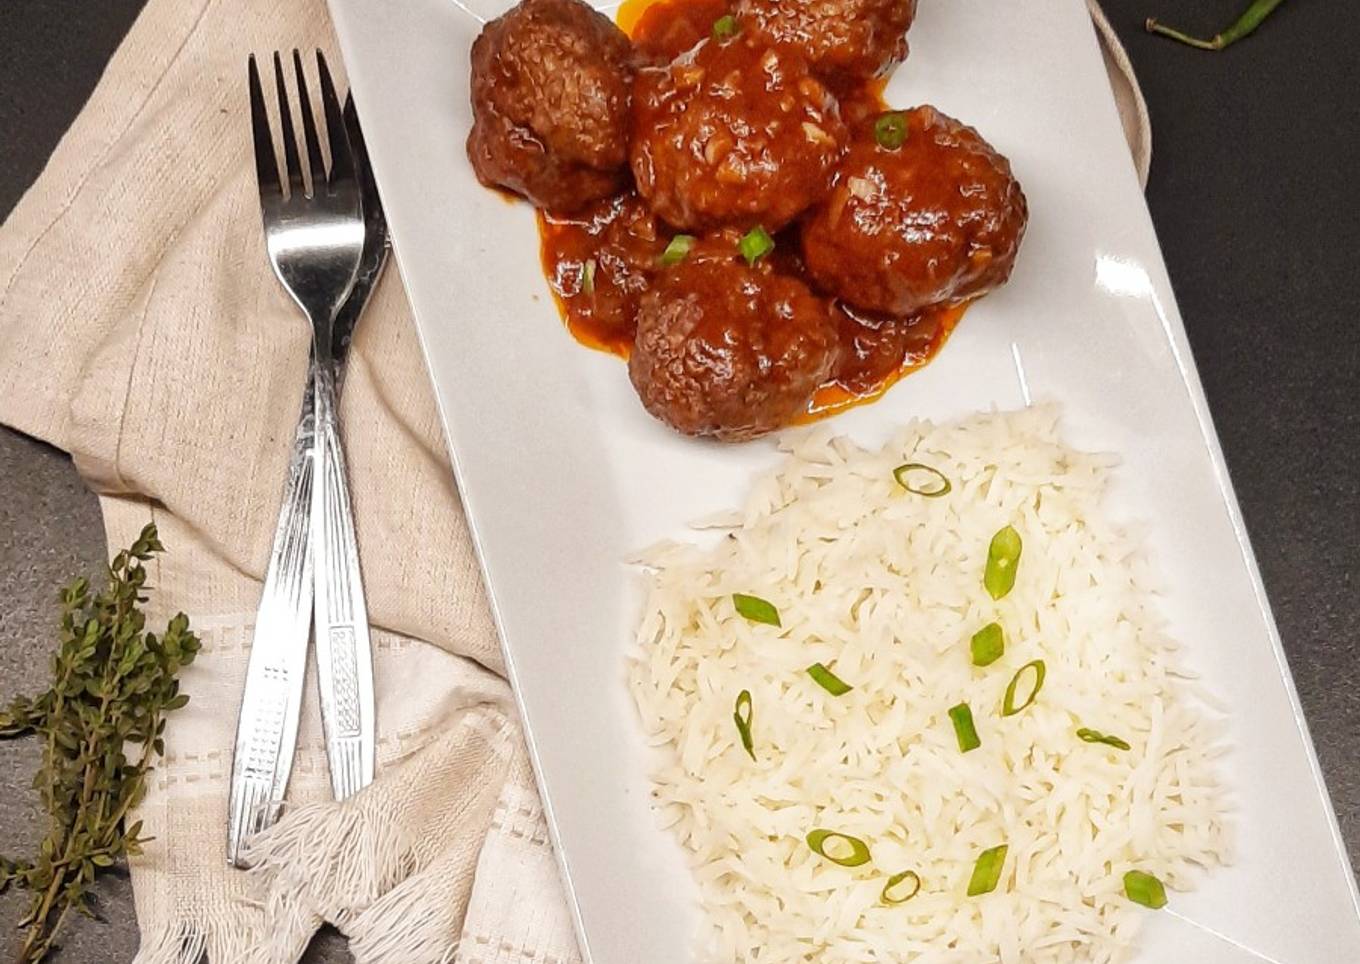 Meatballs in tomato and red wine sauce